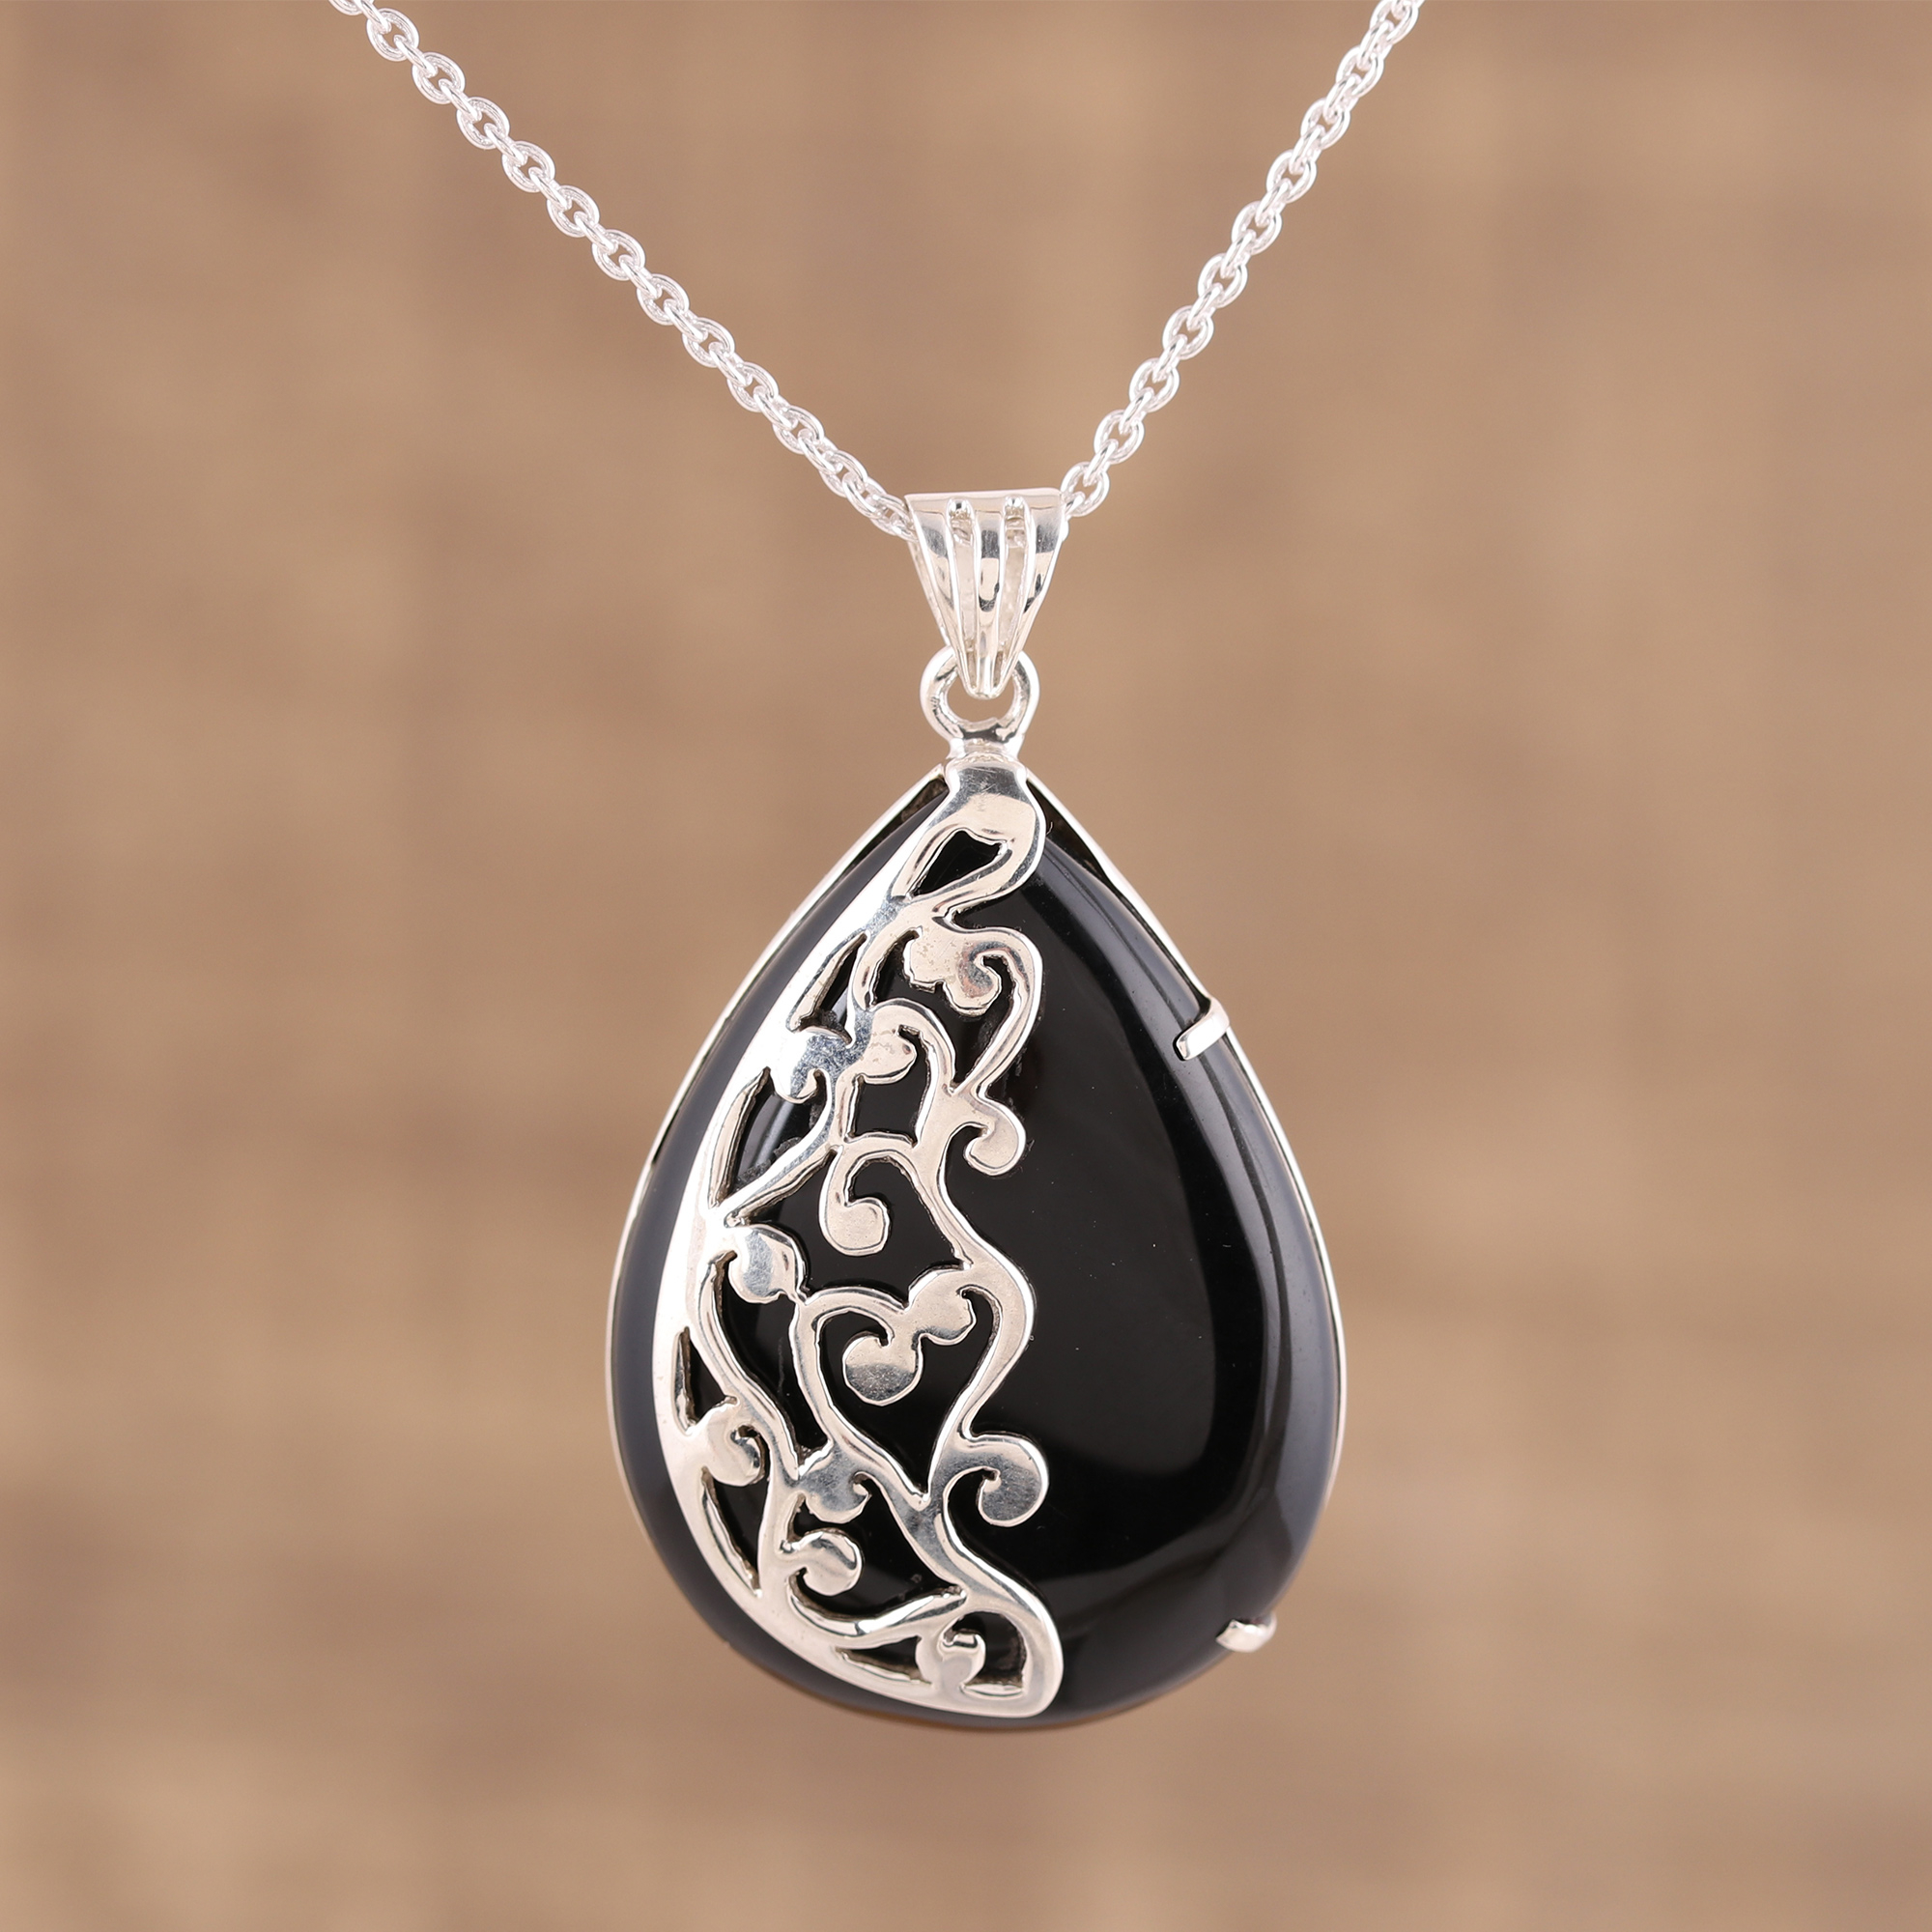 Tom Wood Onyx Pendant Sterling Silver Necklace - Black